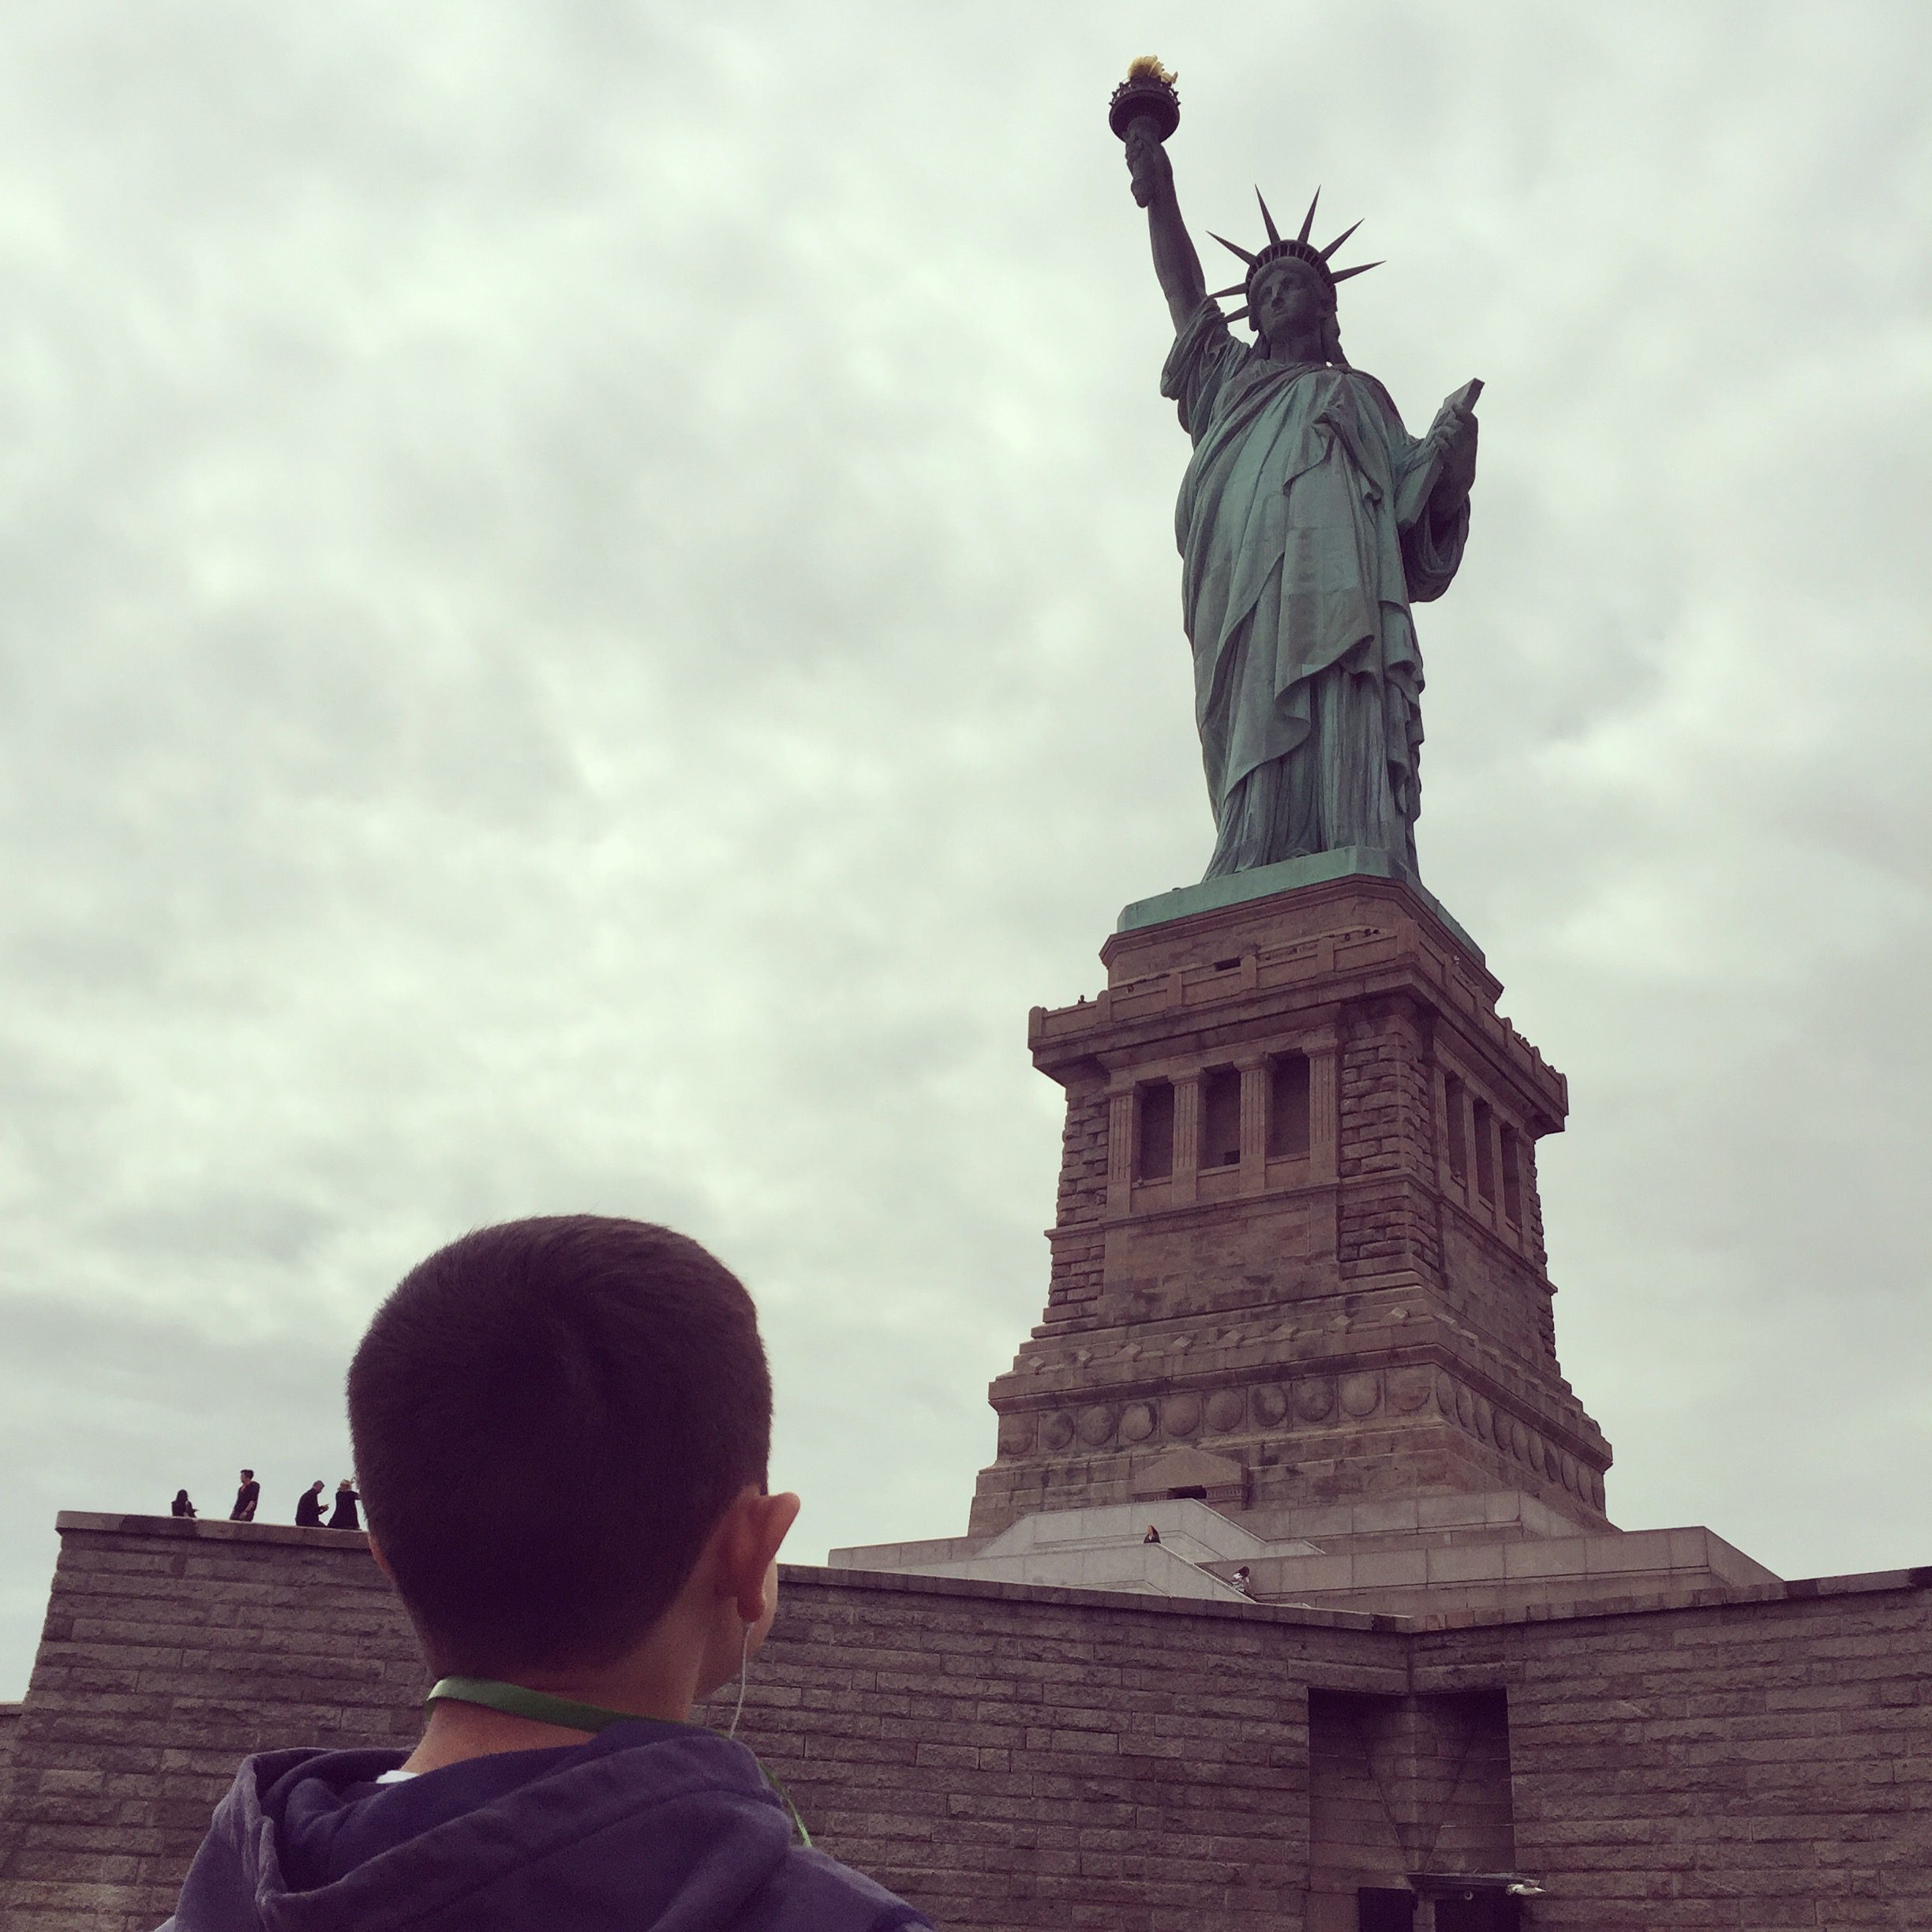 Visiting the Statue of Liberty with Kids